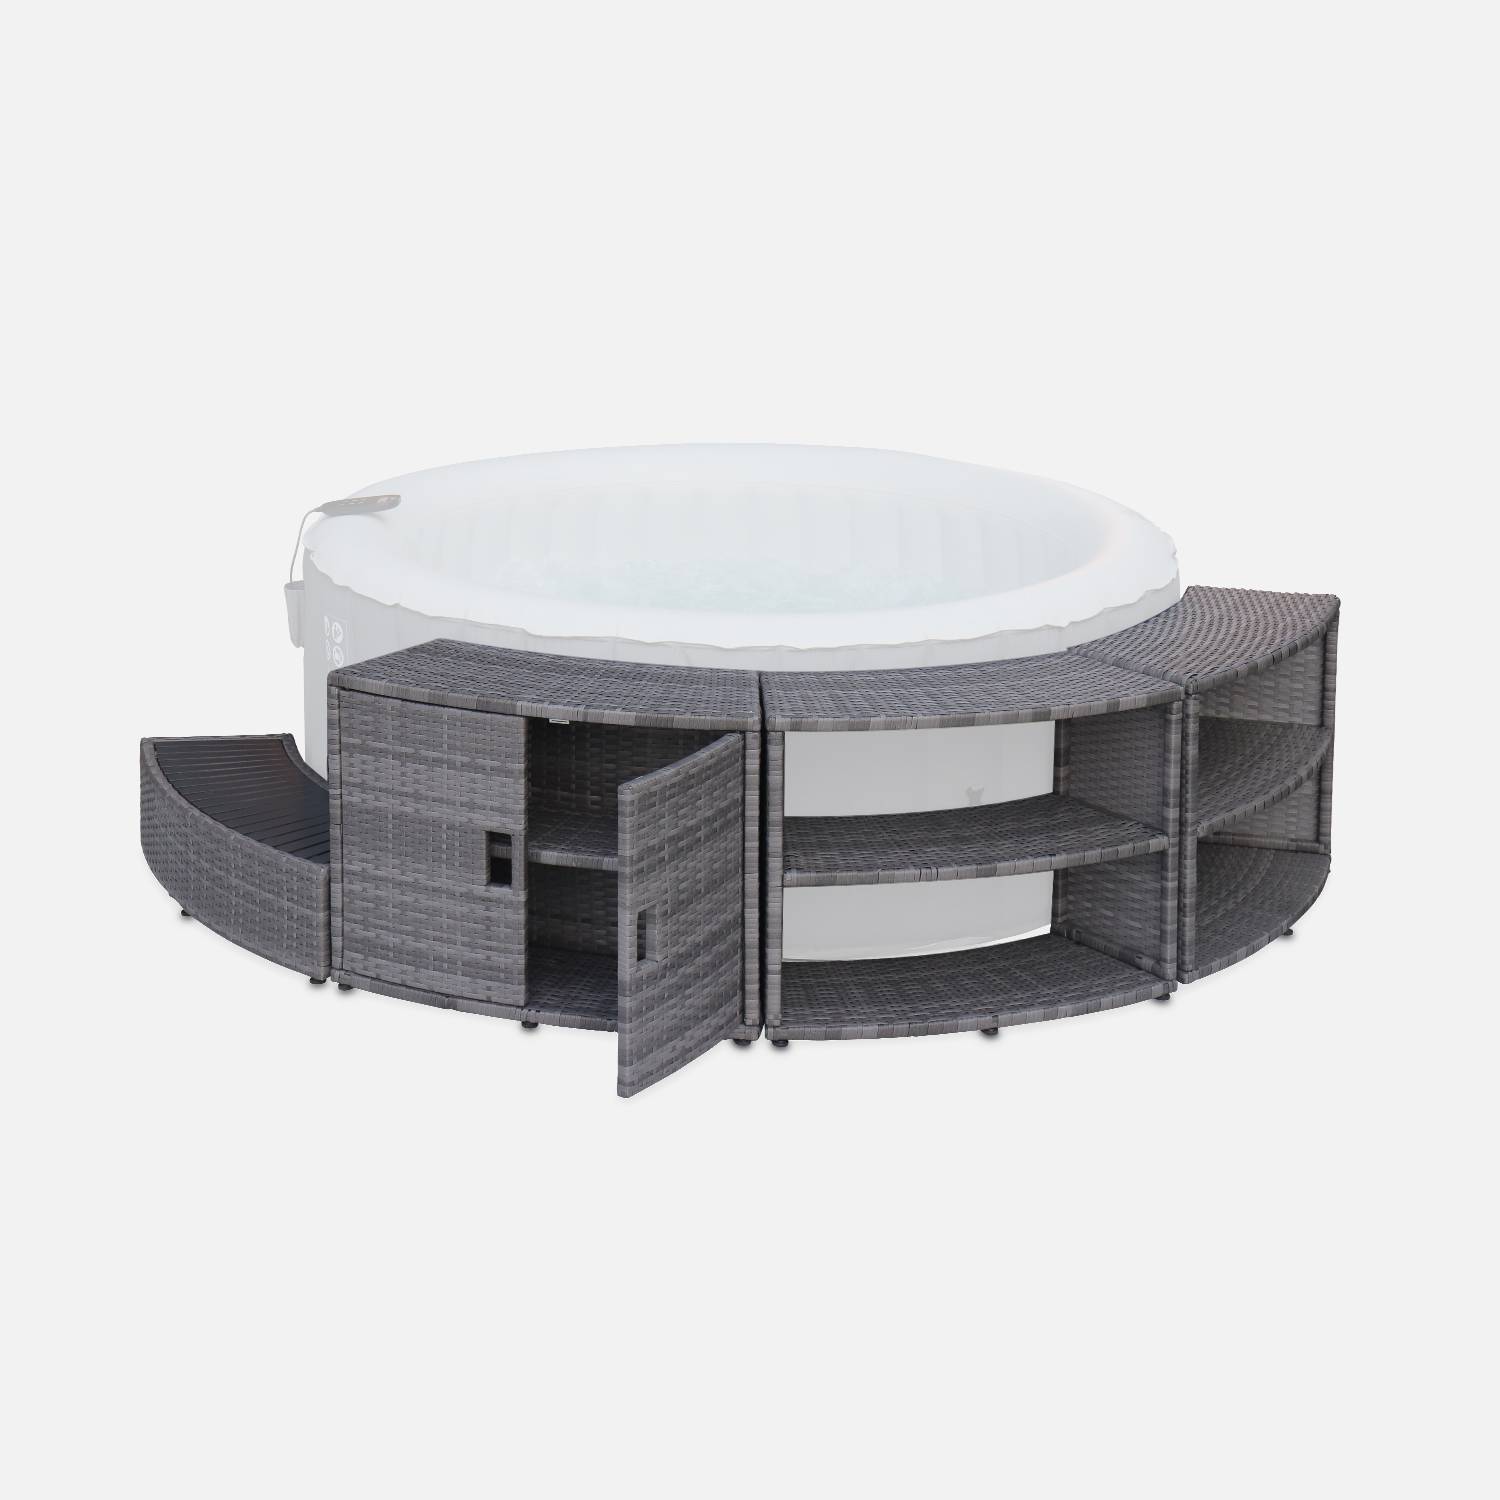 Grey polyrattan for hot tub surrond for 4 or 6 seater hot tub 180 x 70 cm - aluminium structure, shelves, cabinet and footstep,sweeek,Photo2